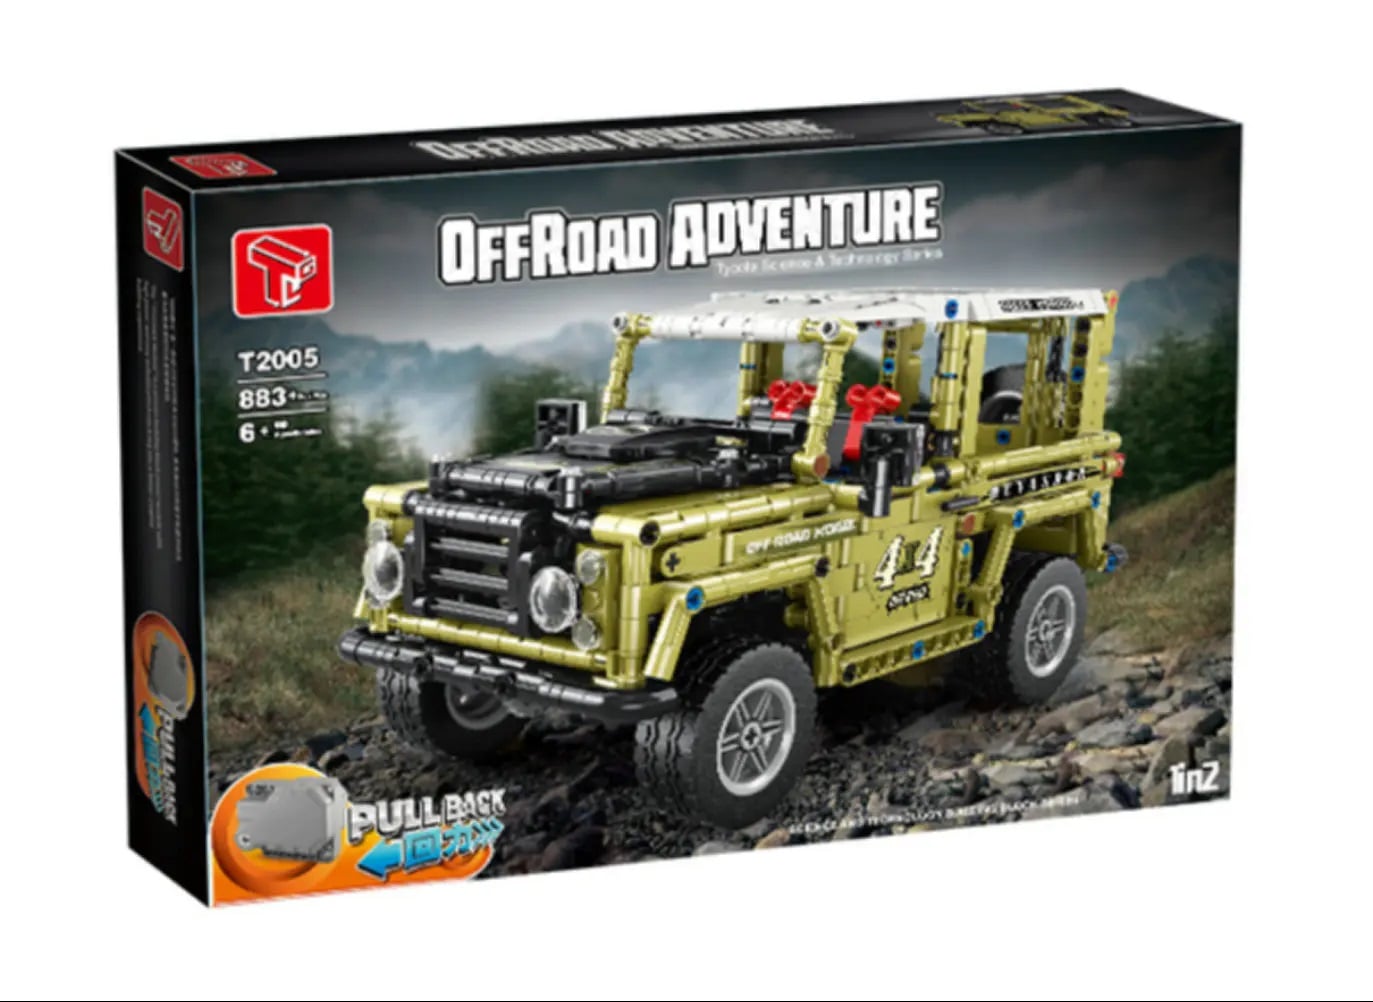 LEGO Technic Land Rover Defender Off Roader 4x4 Car Toy